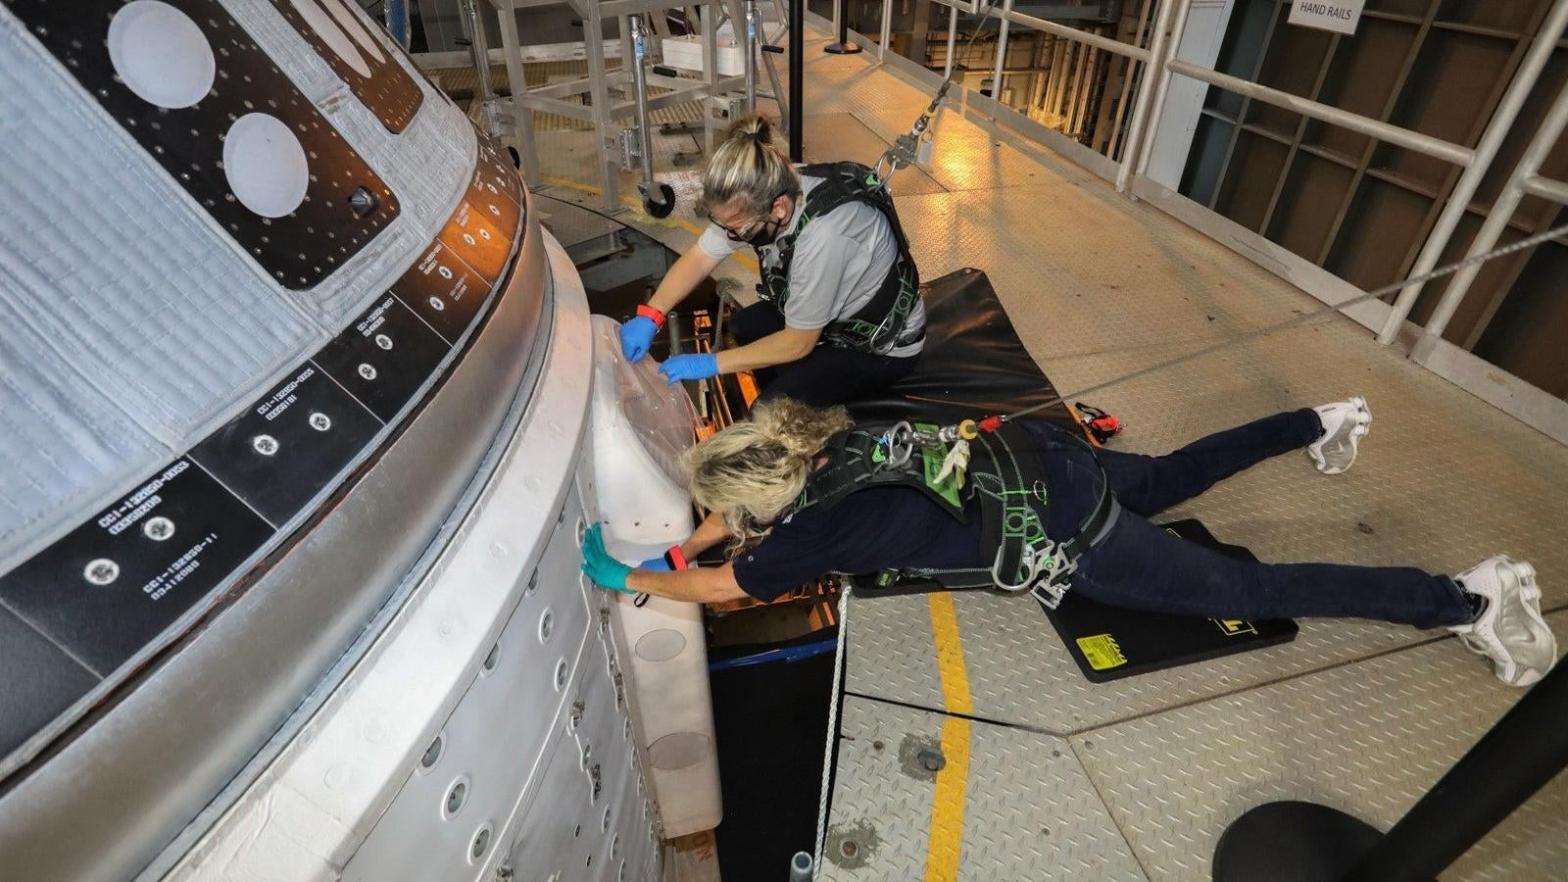 Boeing engineers attending to the glitchy Starliner, currently parked inside the Vertical Integration Facility (VIF) at Space Launch Complex-41.  (Image: Boeing)